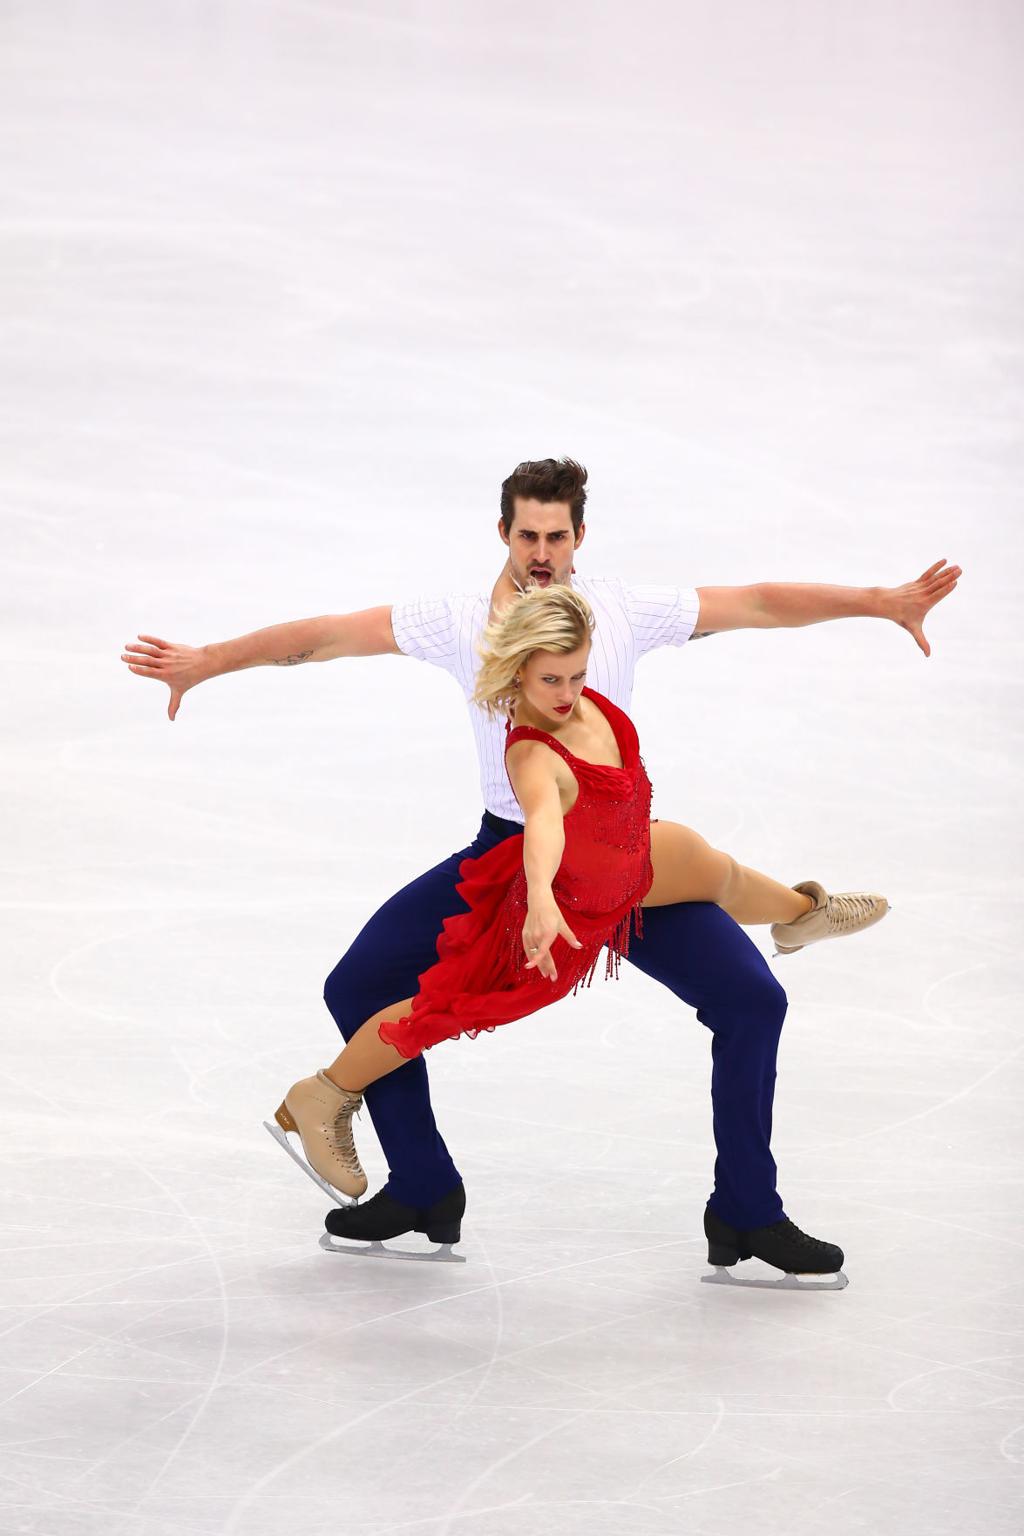 Ice skaters' costumes help them tell a story and dazzle spectators